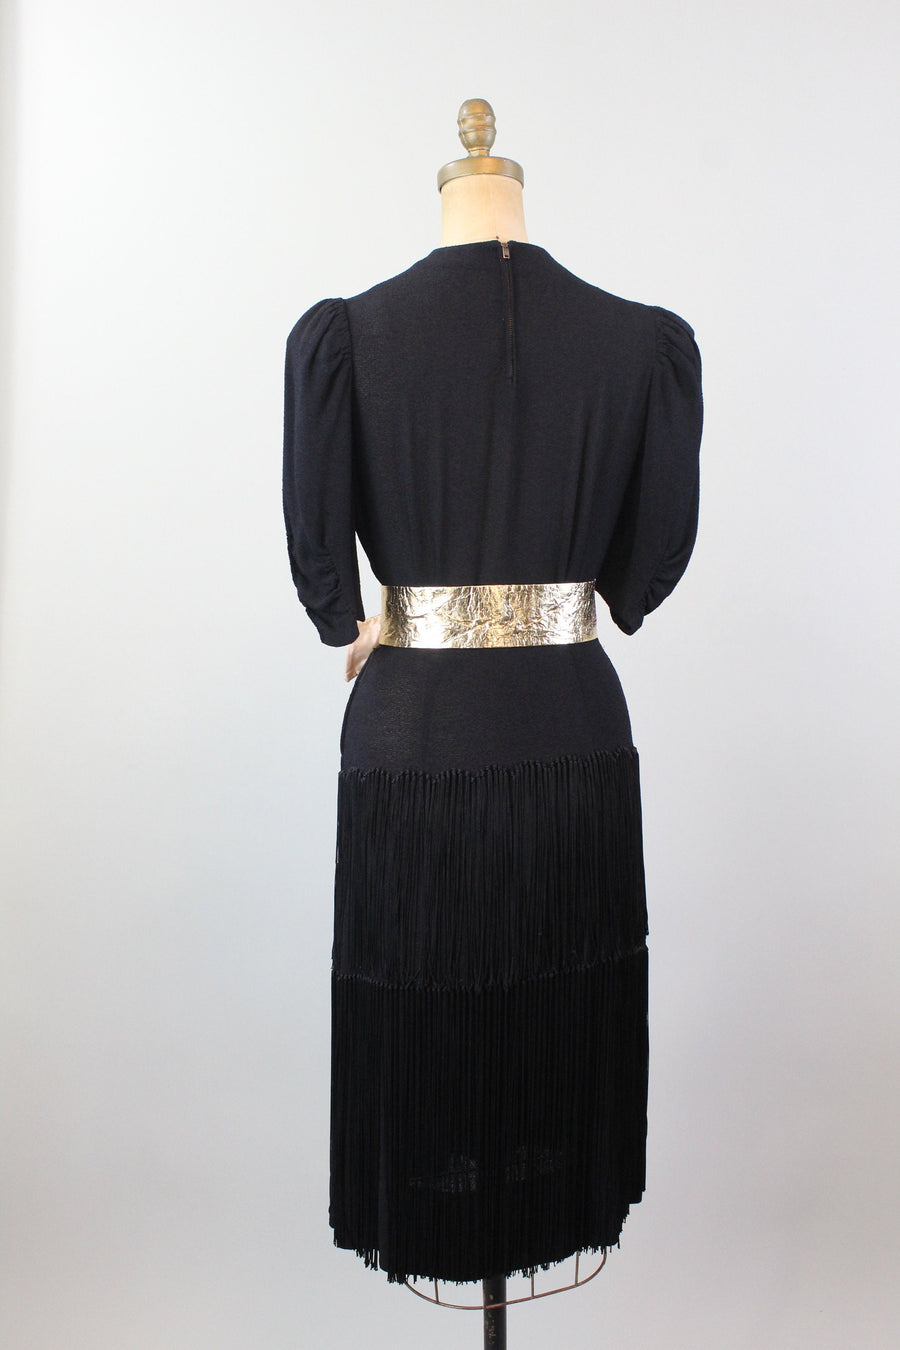 1940s FRINGE rayon crepe dress small  |  new spring